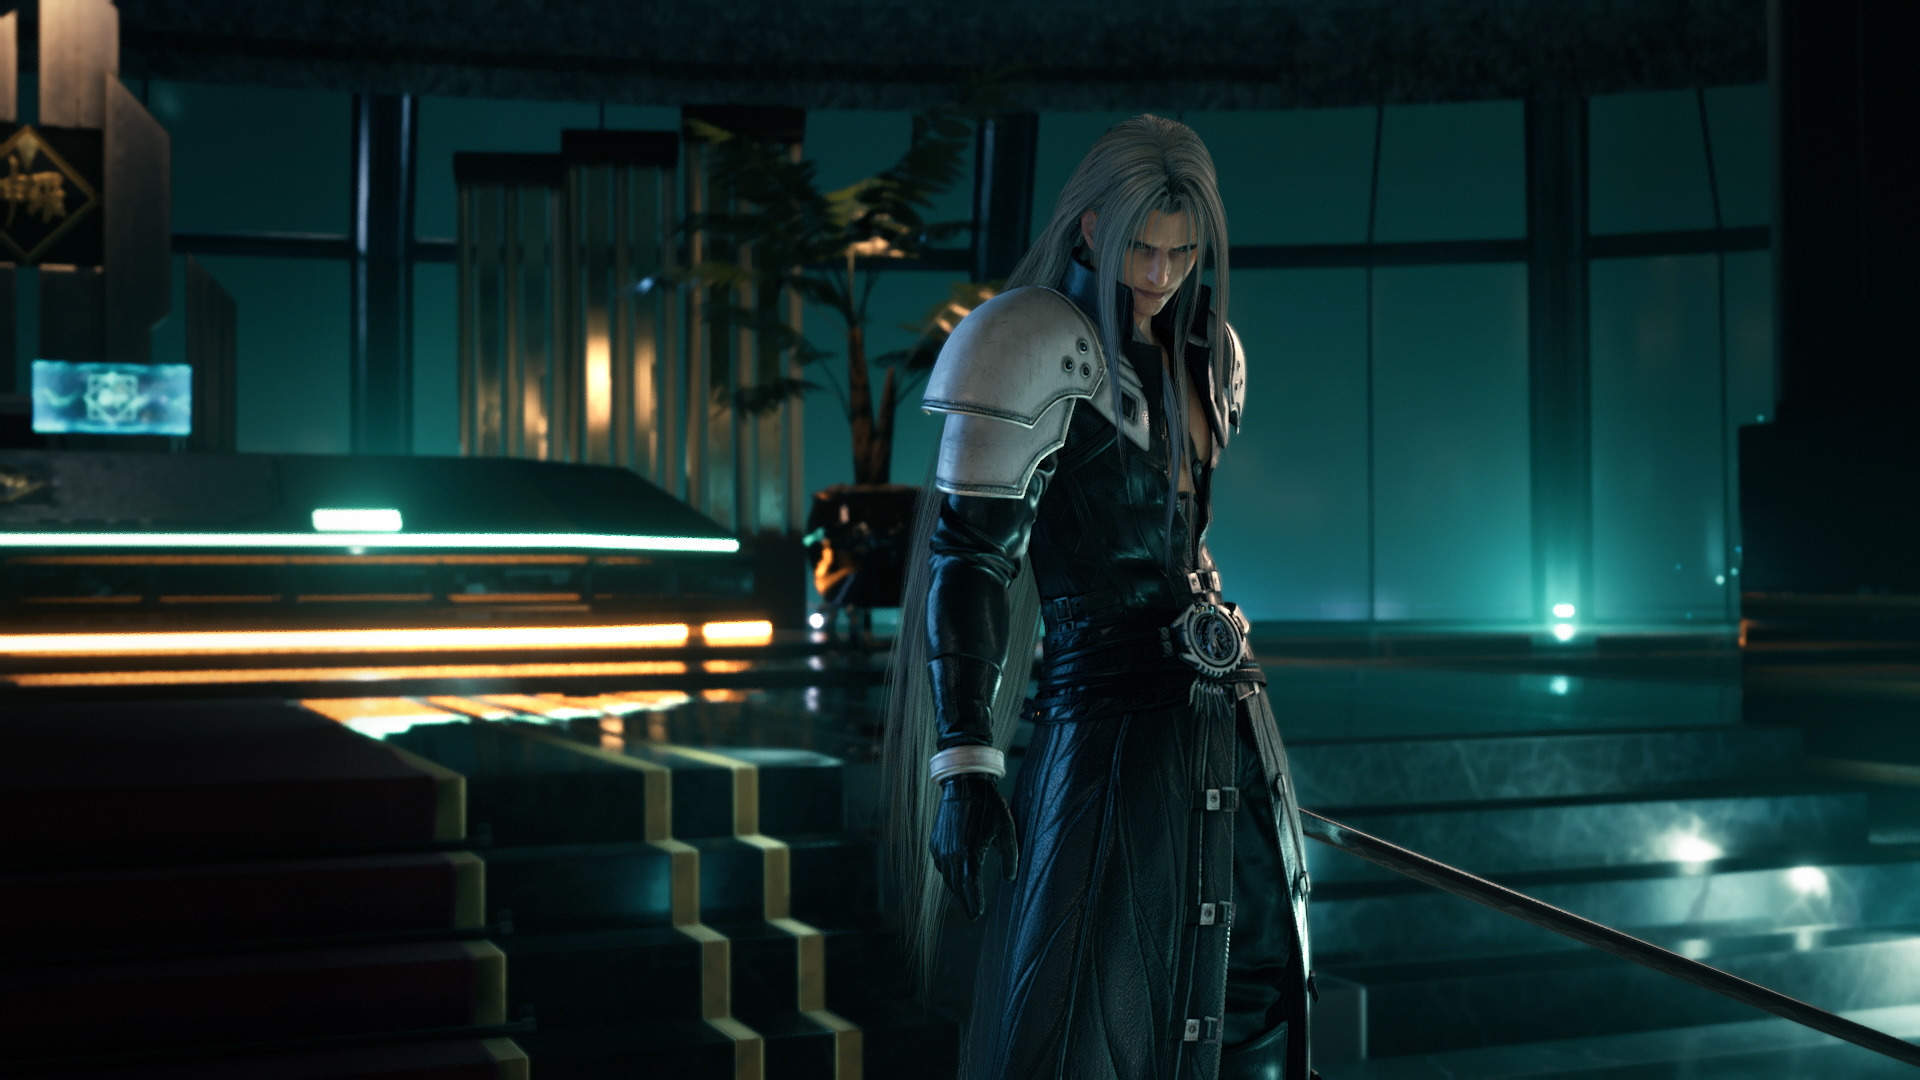 Nomura: I Hope to Release FFVII Remake Part 2 ASAP; Next Game(s) Won't Completely Deviate From the Original, Kitase Says